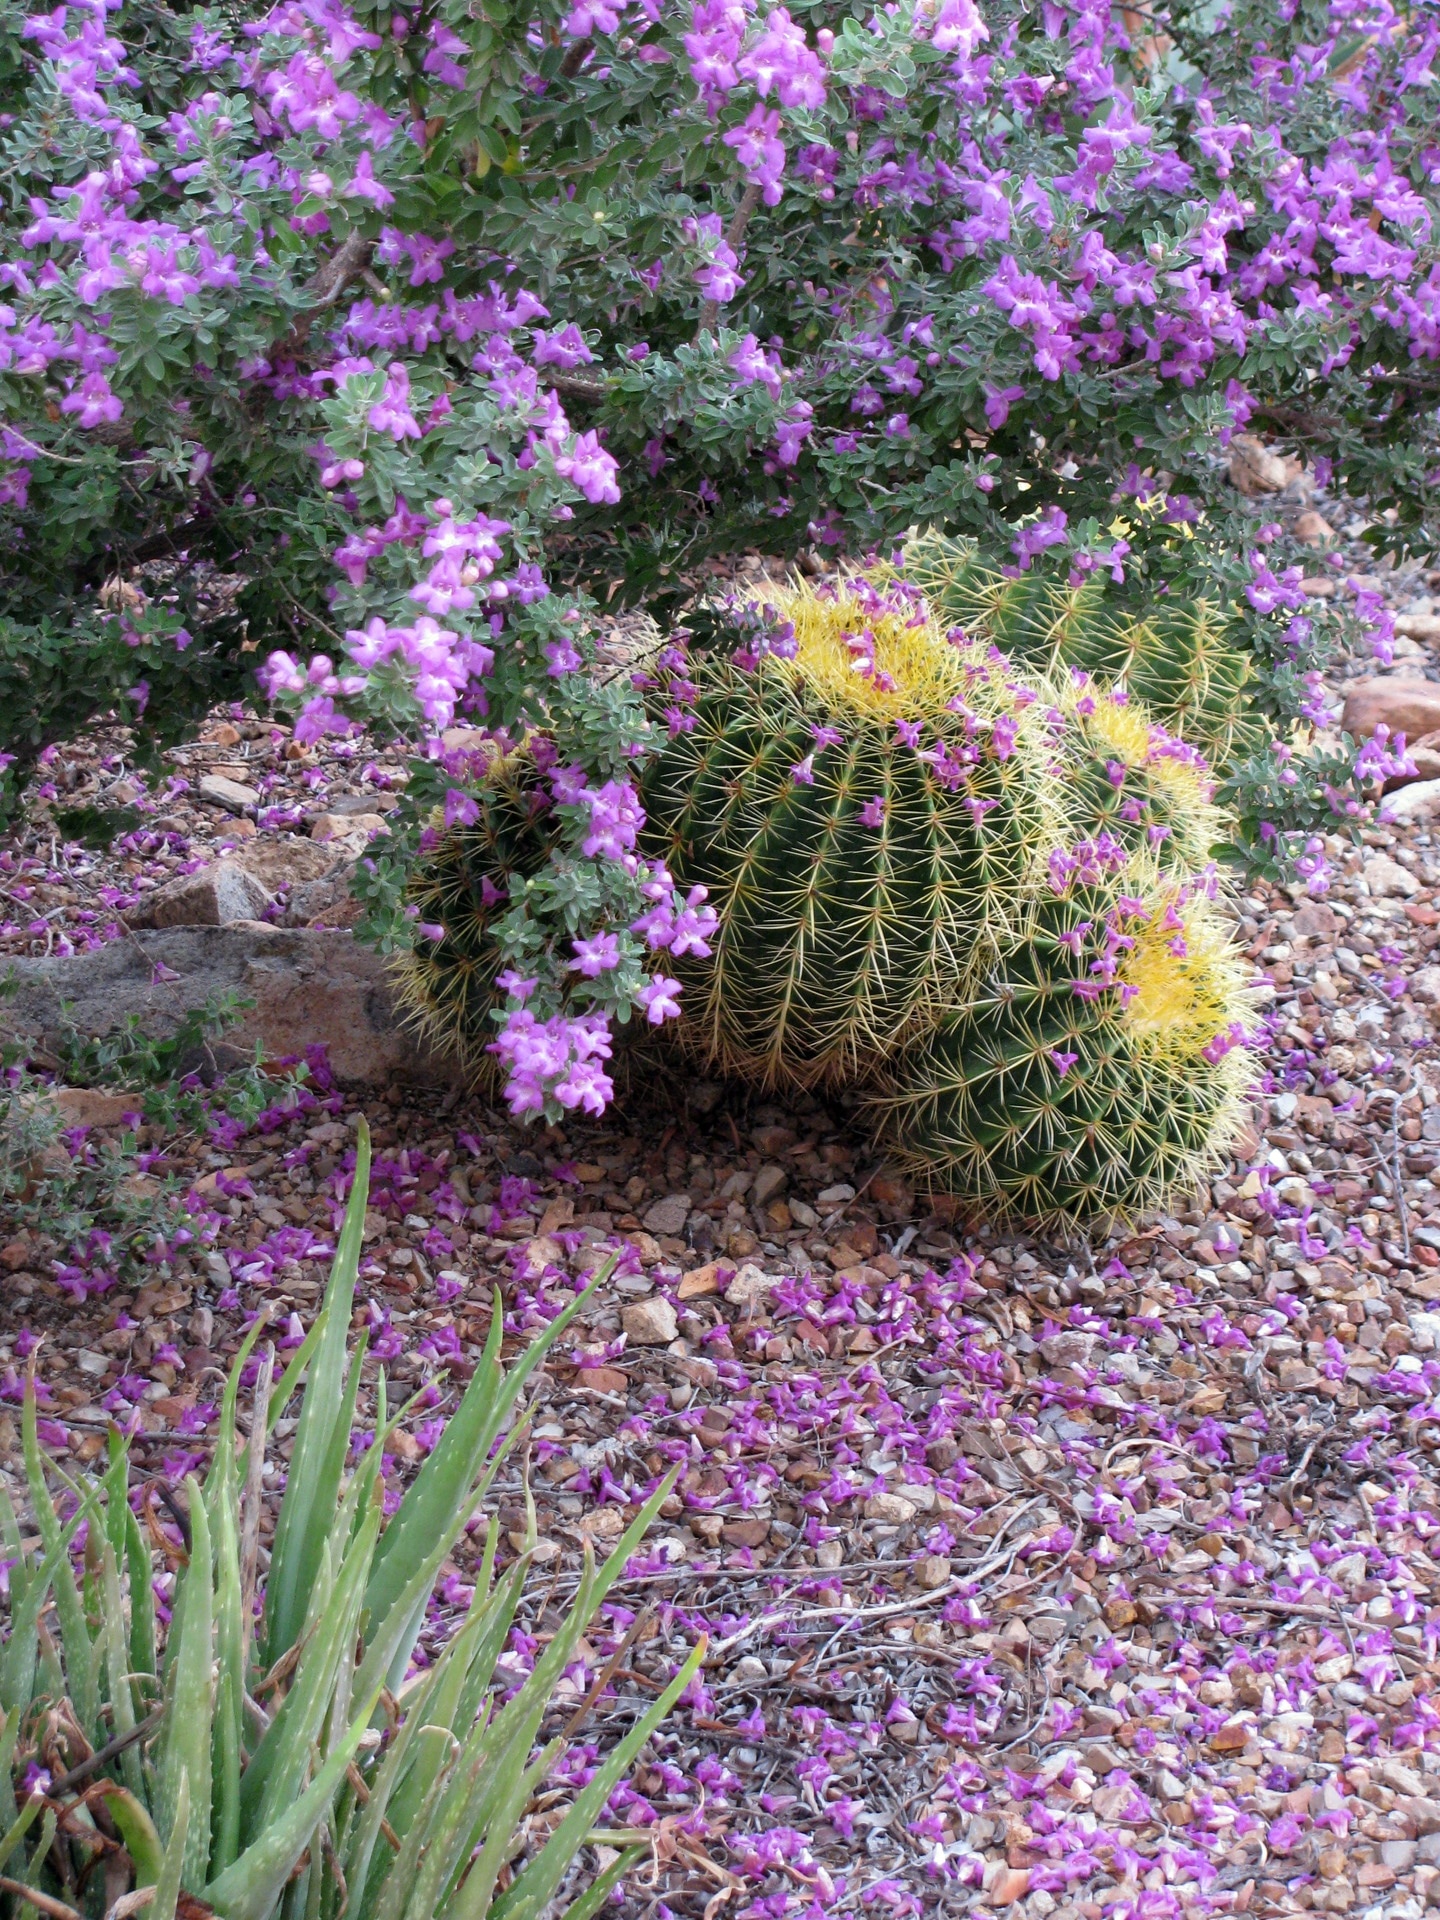 green cactus with purple flower